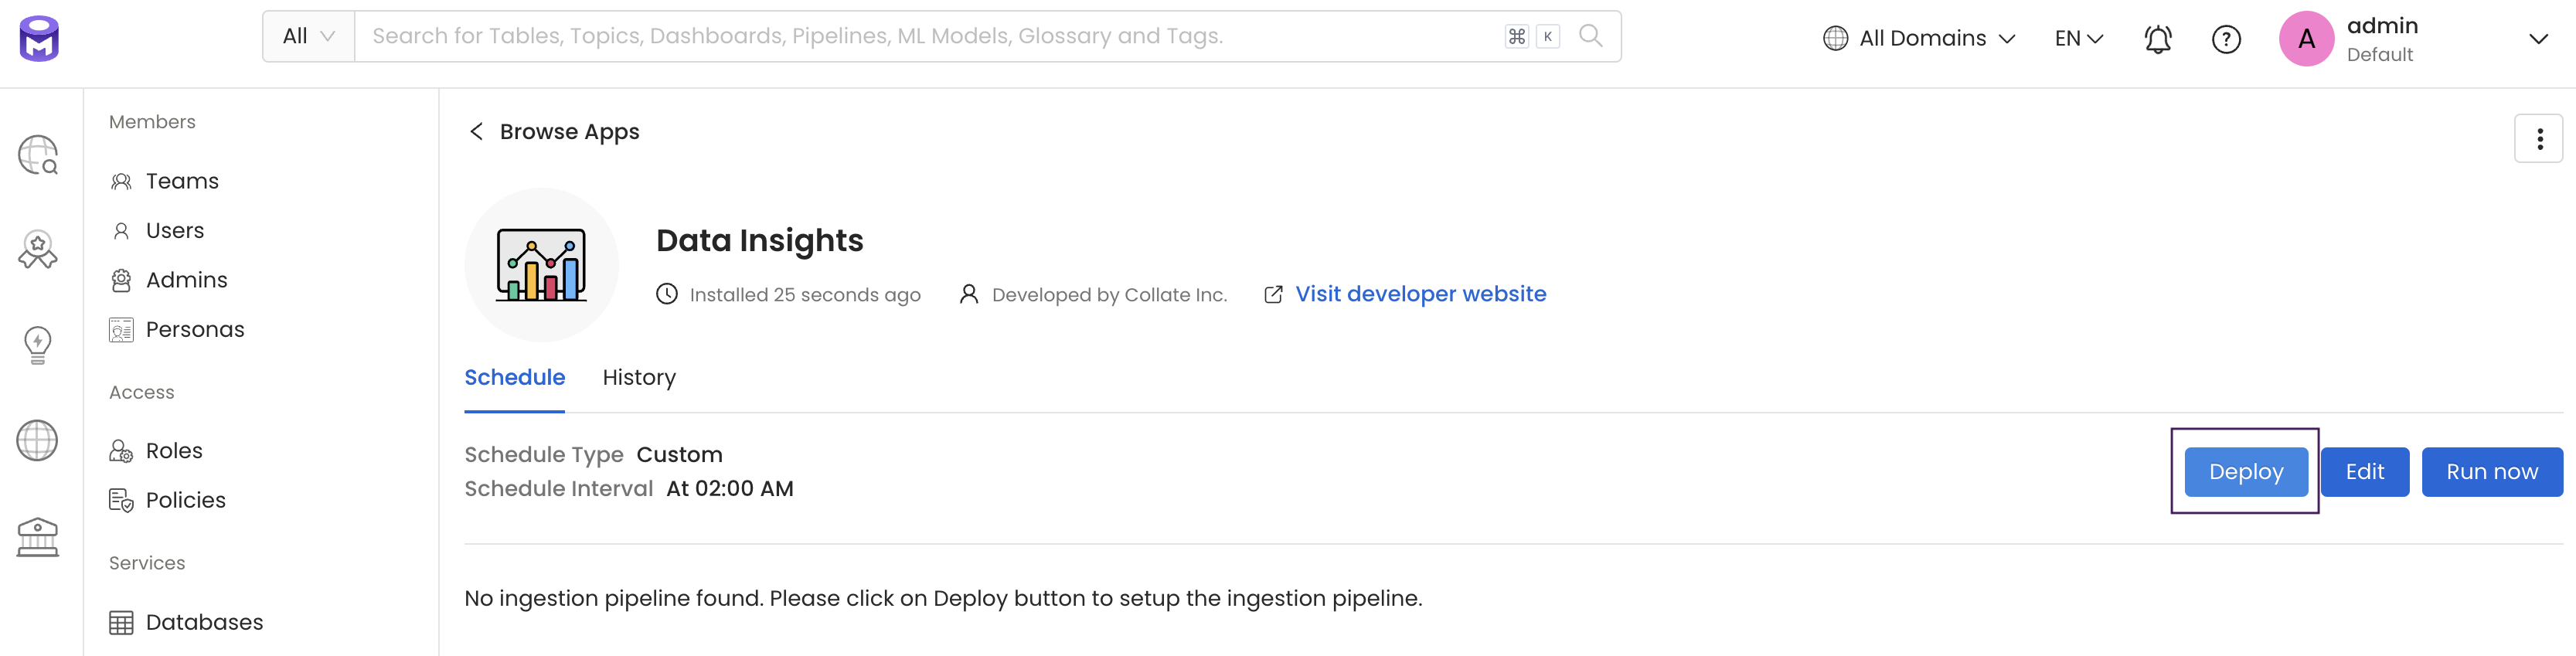 Deploy the Data Insights Pipeline